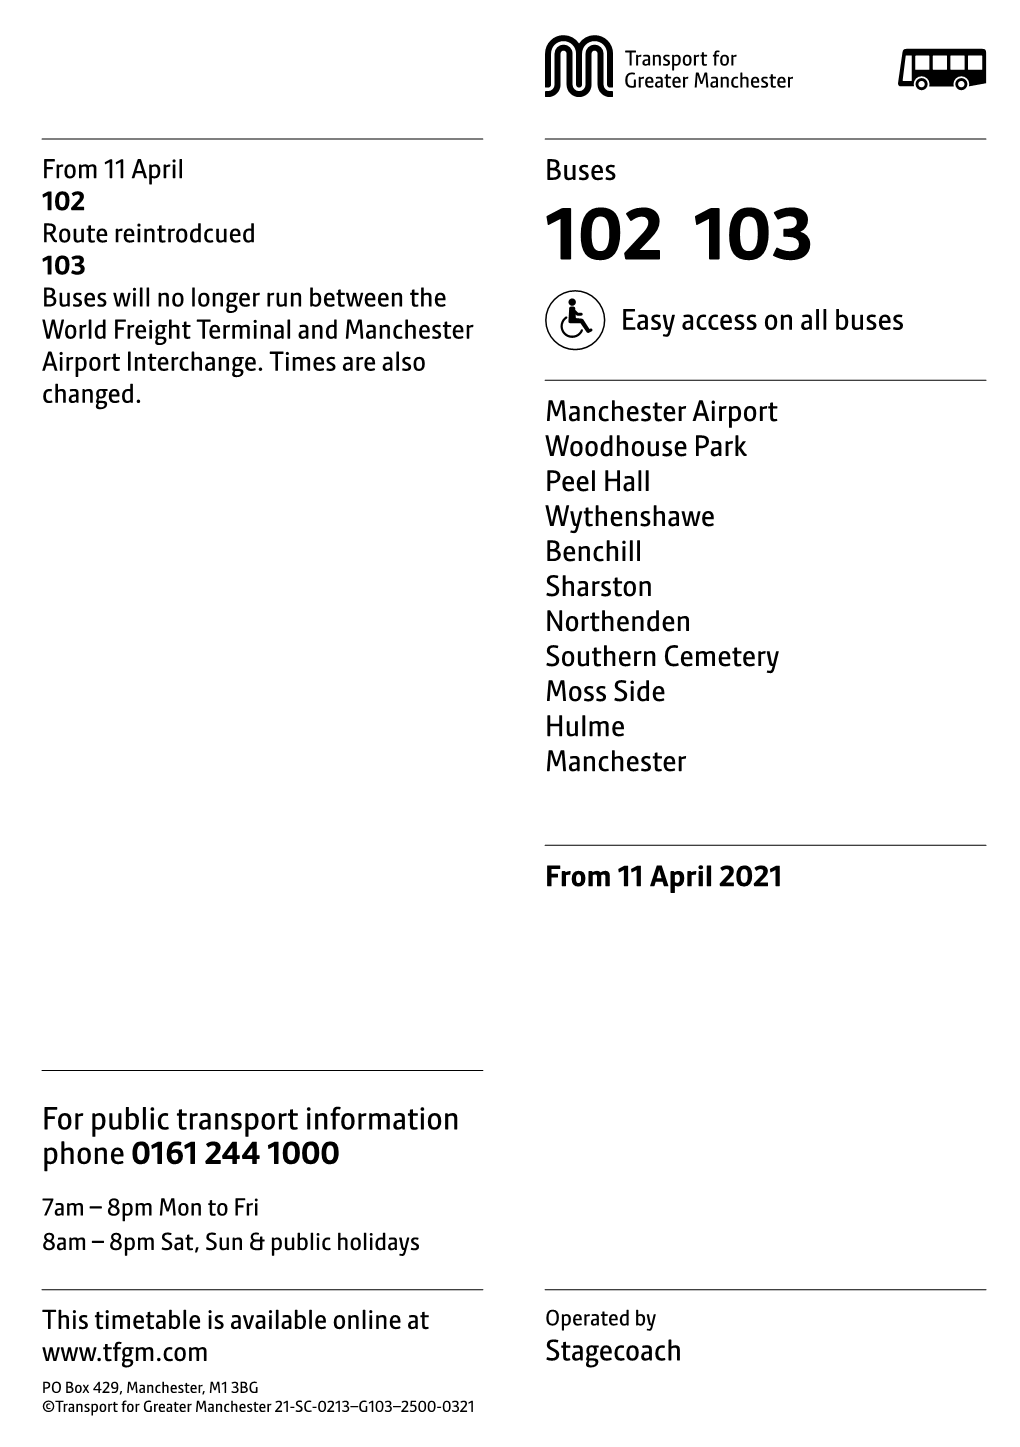 102 Route Reintrodcued 103 102 103 Buses Will No Longer Run Between the World Freight Terminal and Manchester Easy Access on All Buses Airport Interchange